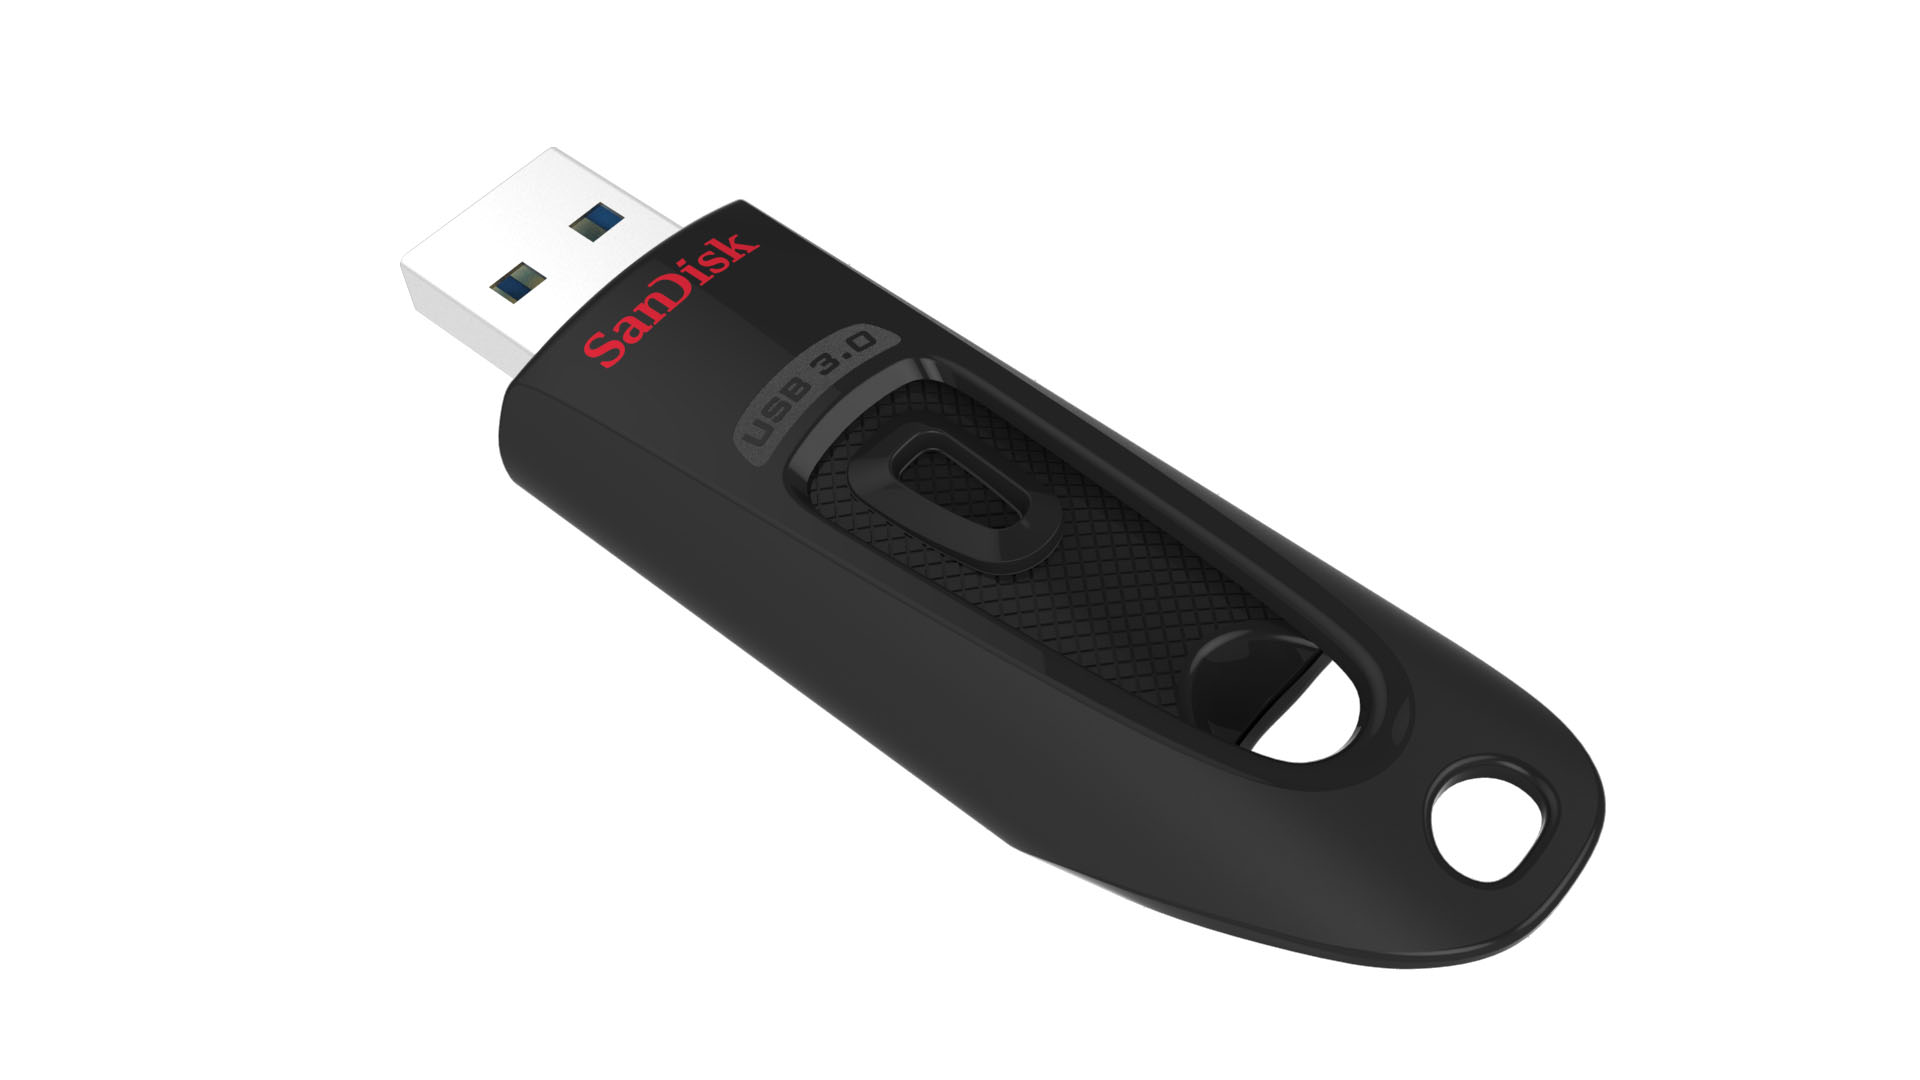 SanDisk 256GB Ultra USB 3.0 Flash Drive - 130MB/s - SDCZ48-256G-AW4 - image 4 of 8